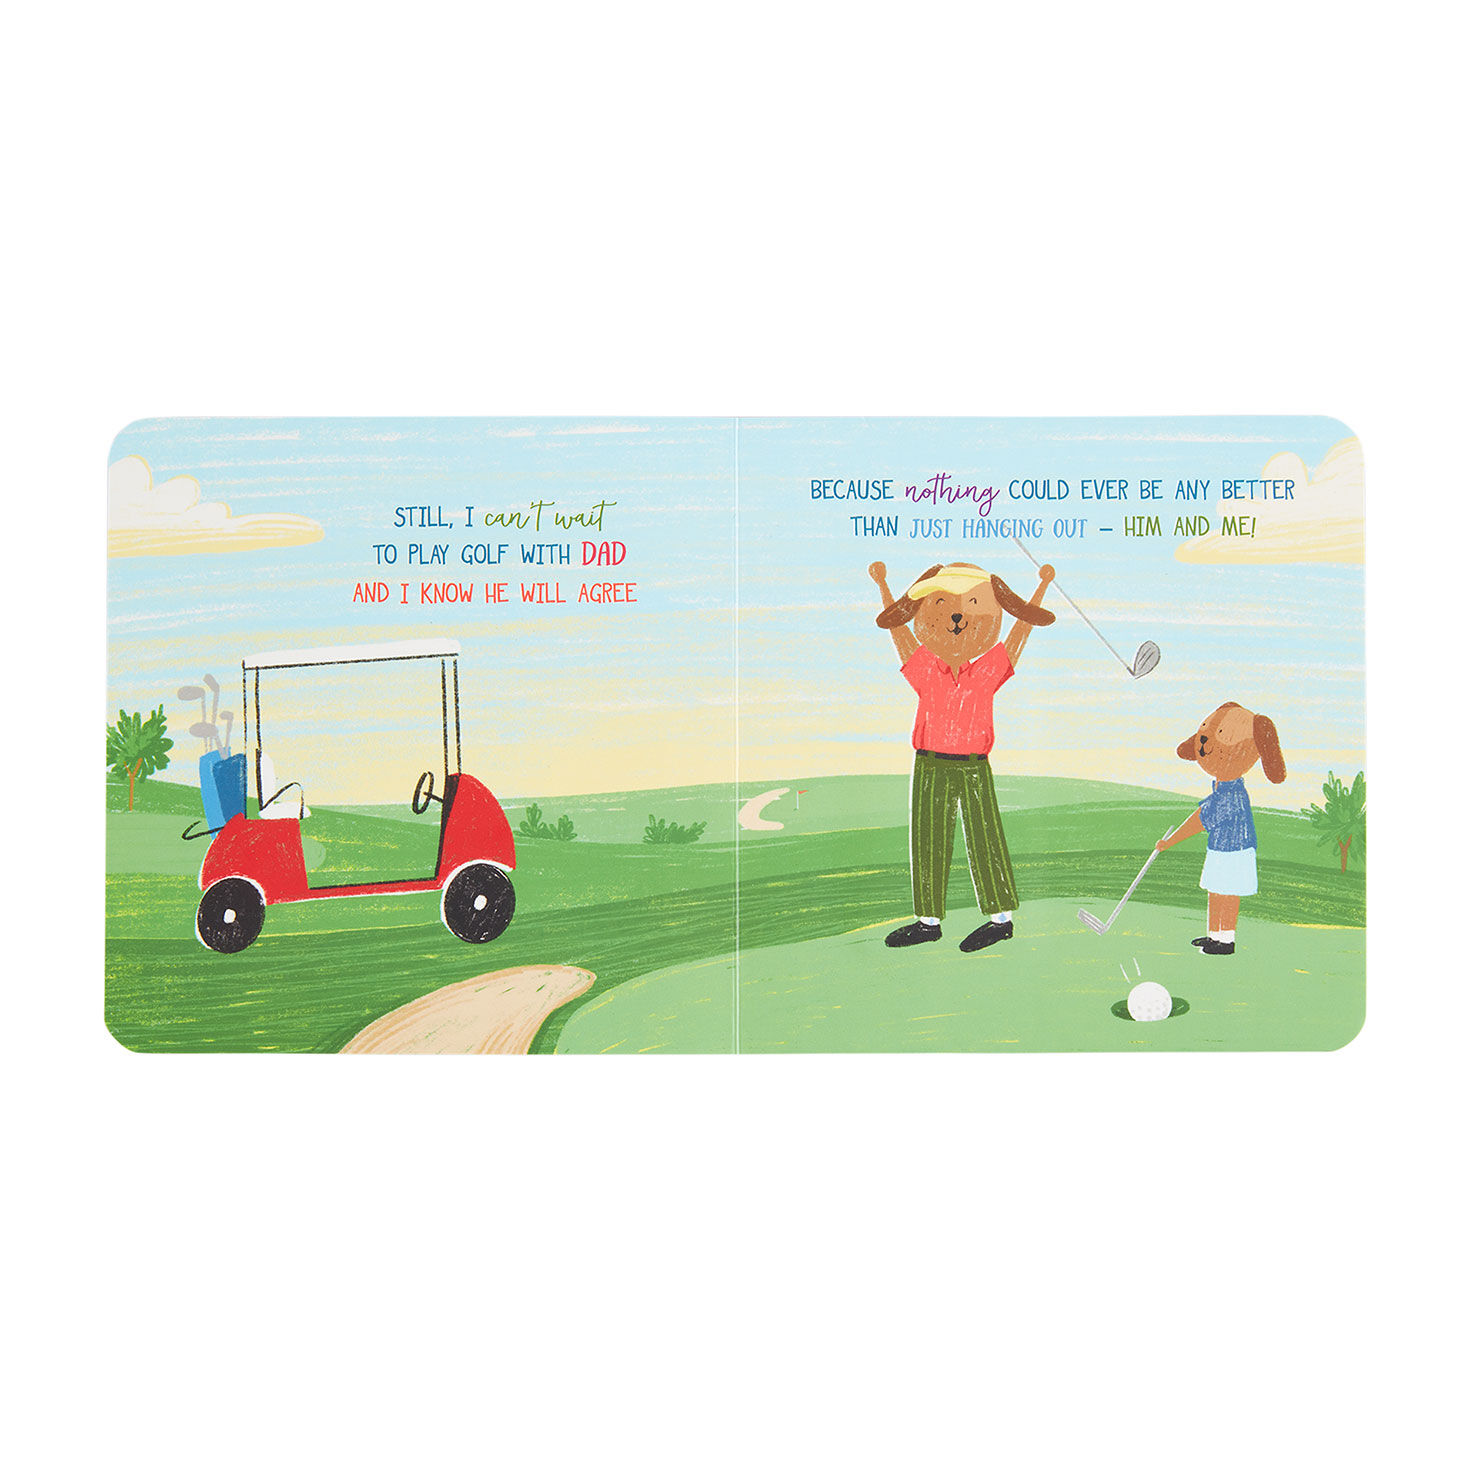 Mud Pie Sounds Like Golf Board Book With Sound for only USD 23.00 | Hallmark